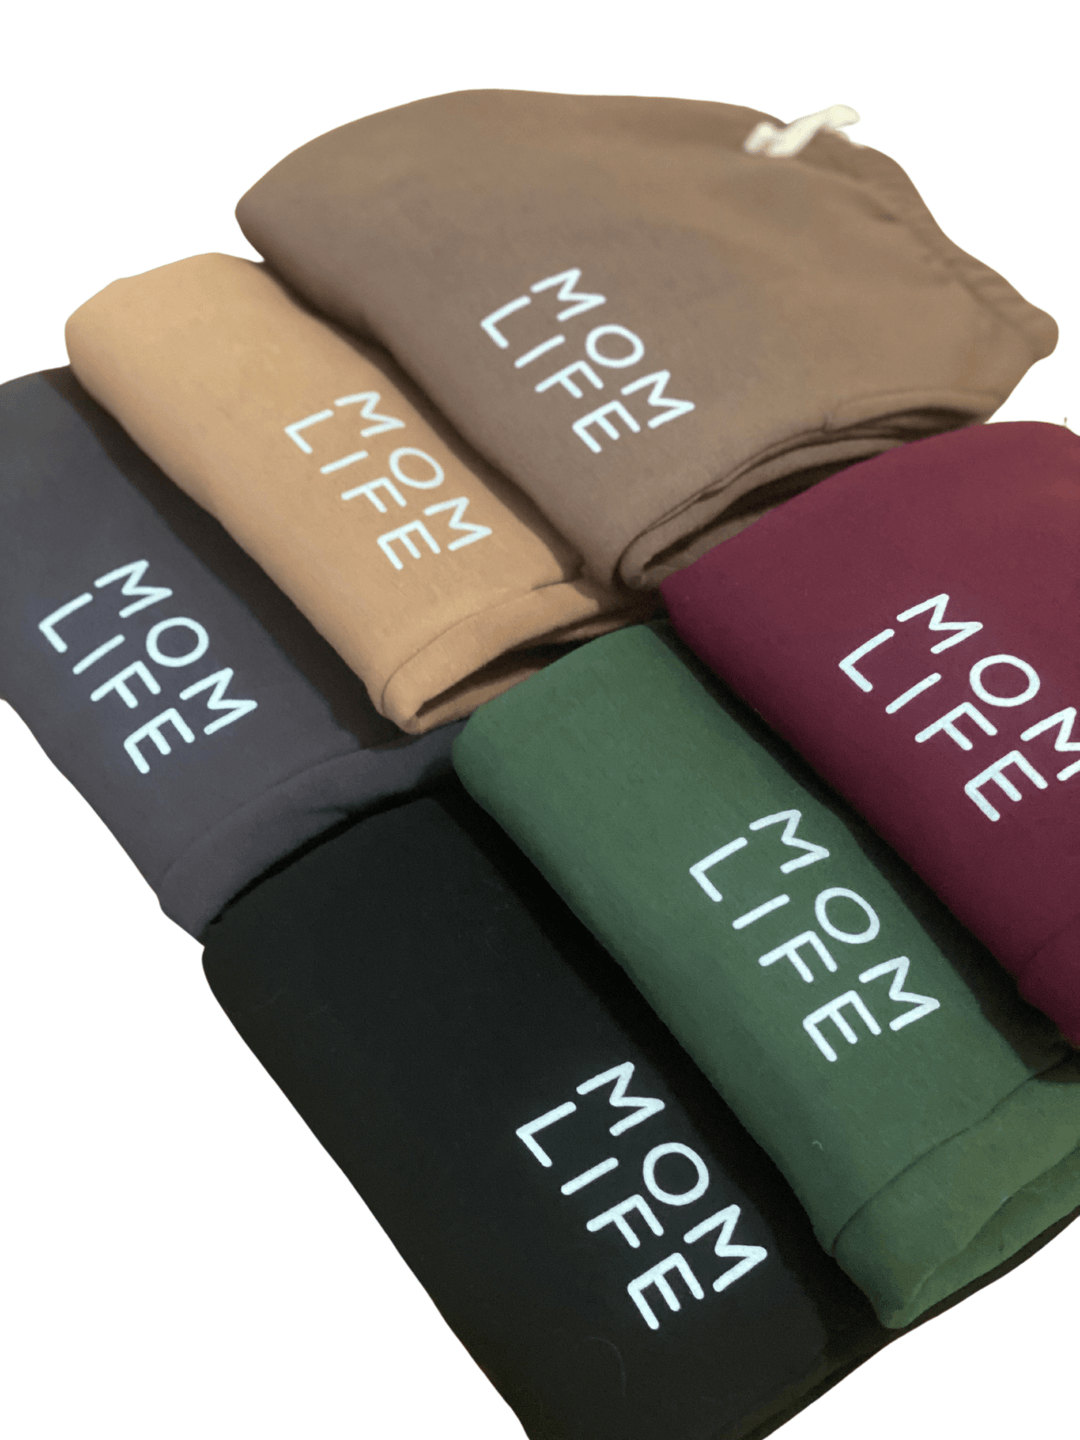 Mom Life Joggers *MORE COLORS*